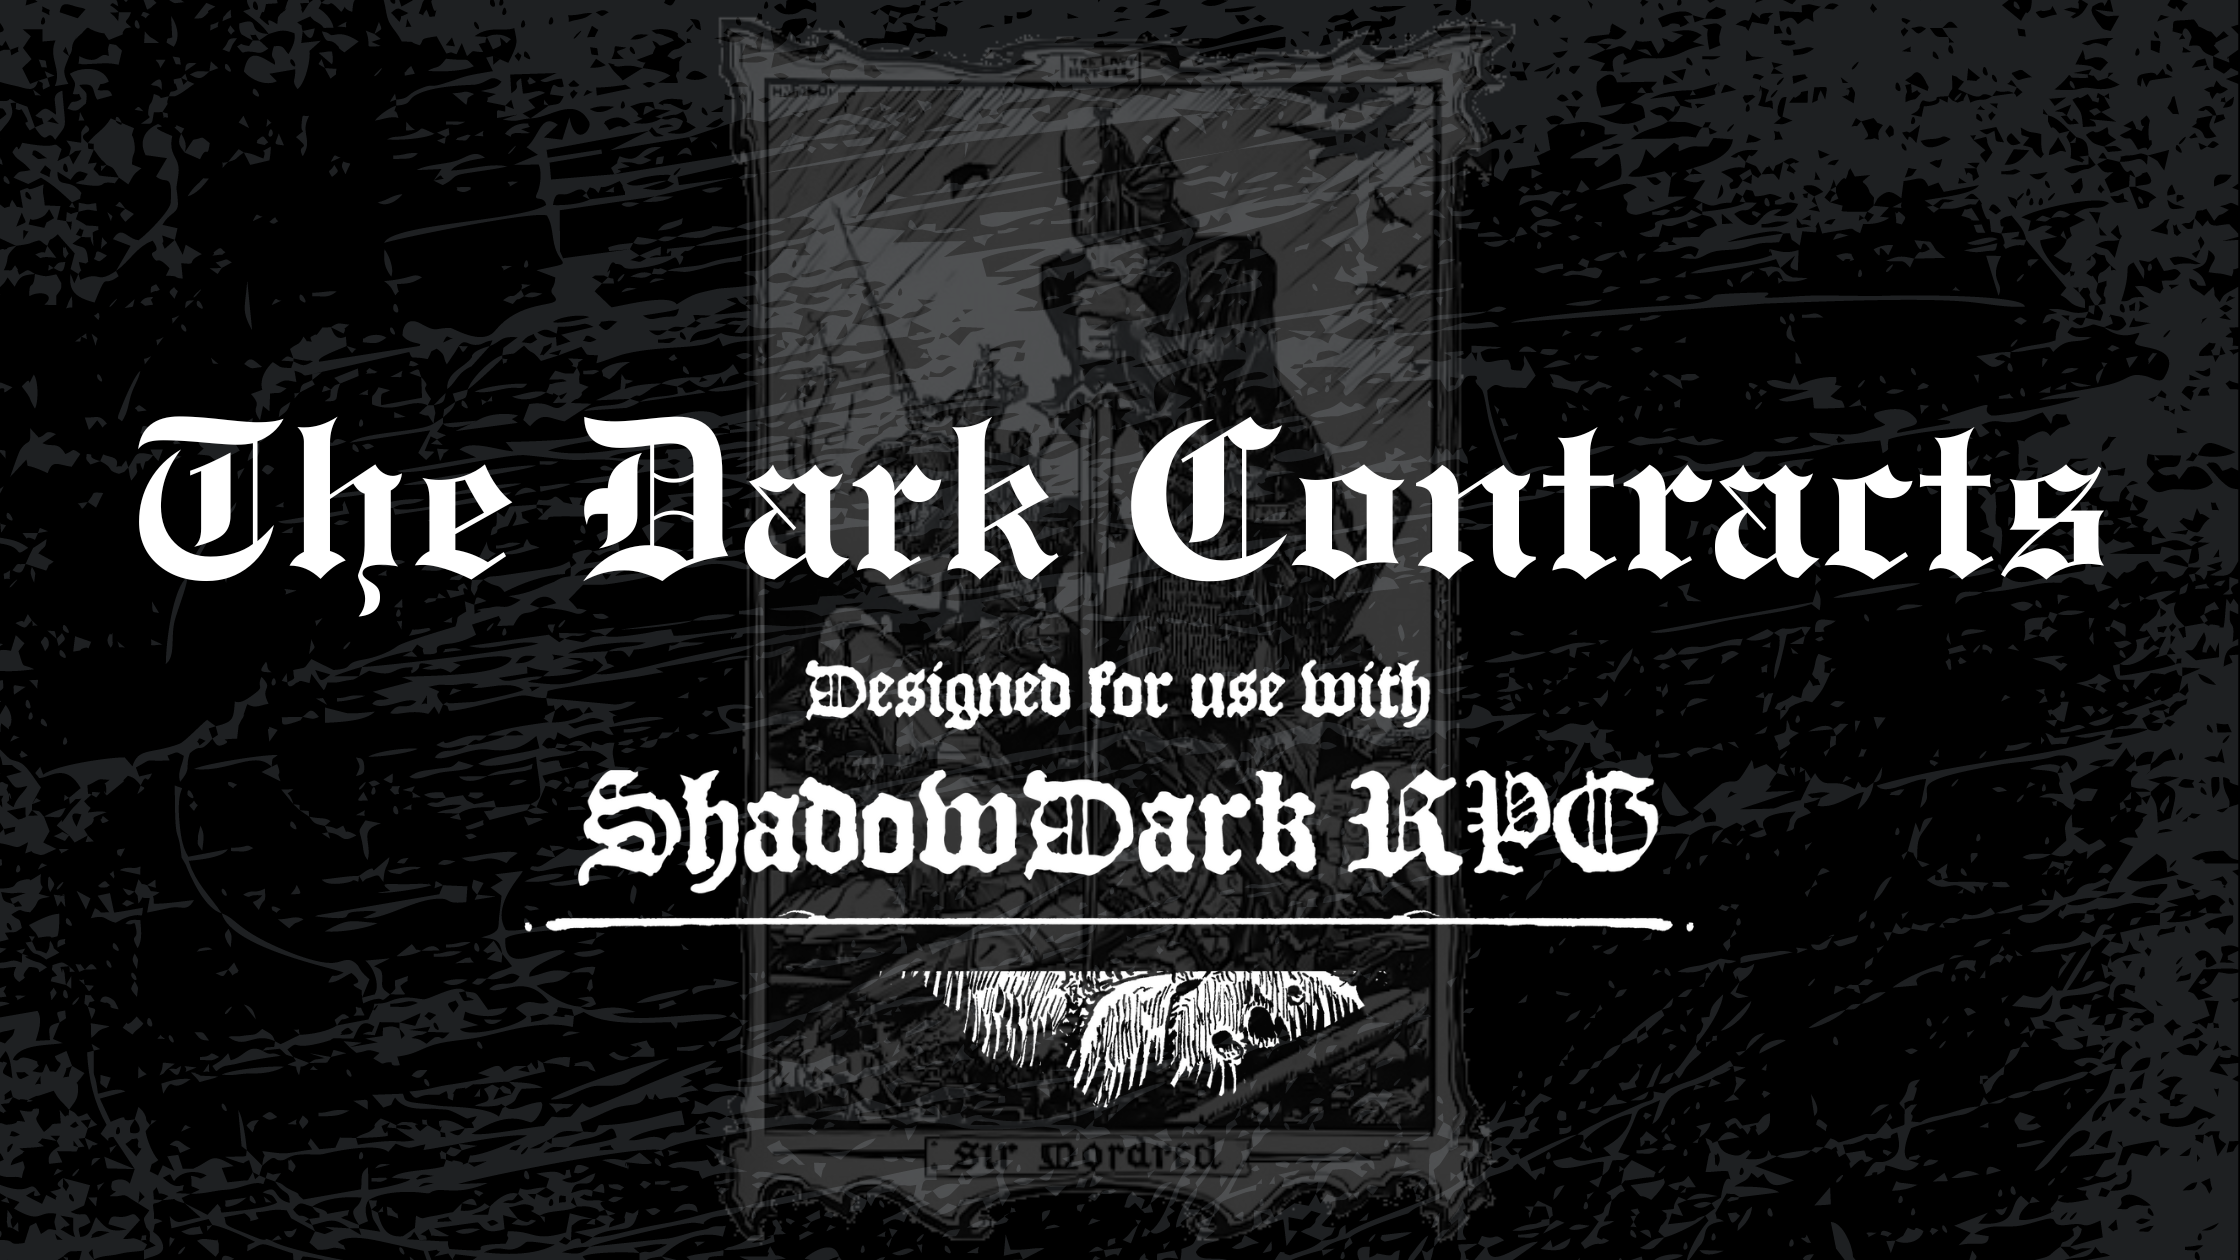 The Dark Contracts designed for use with Shadowdark RPG